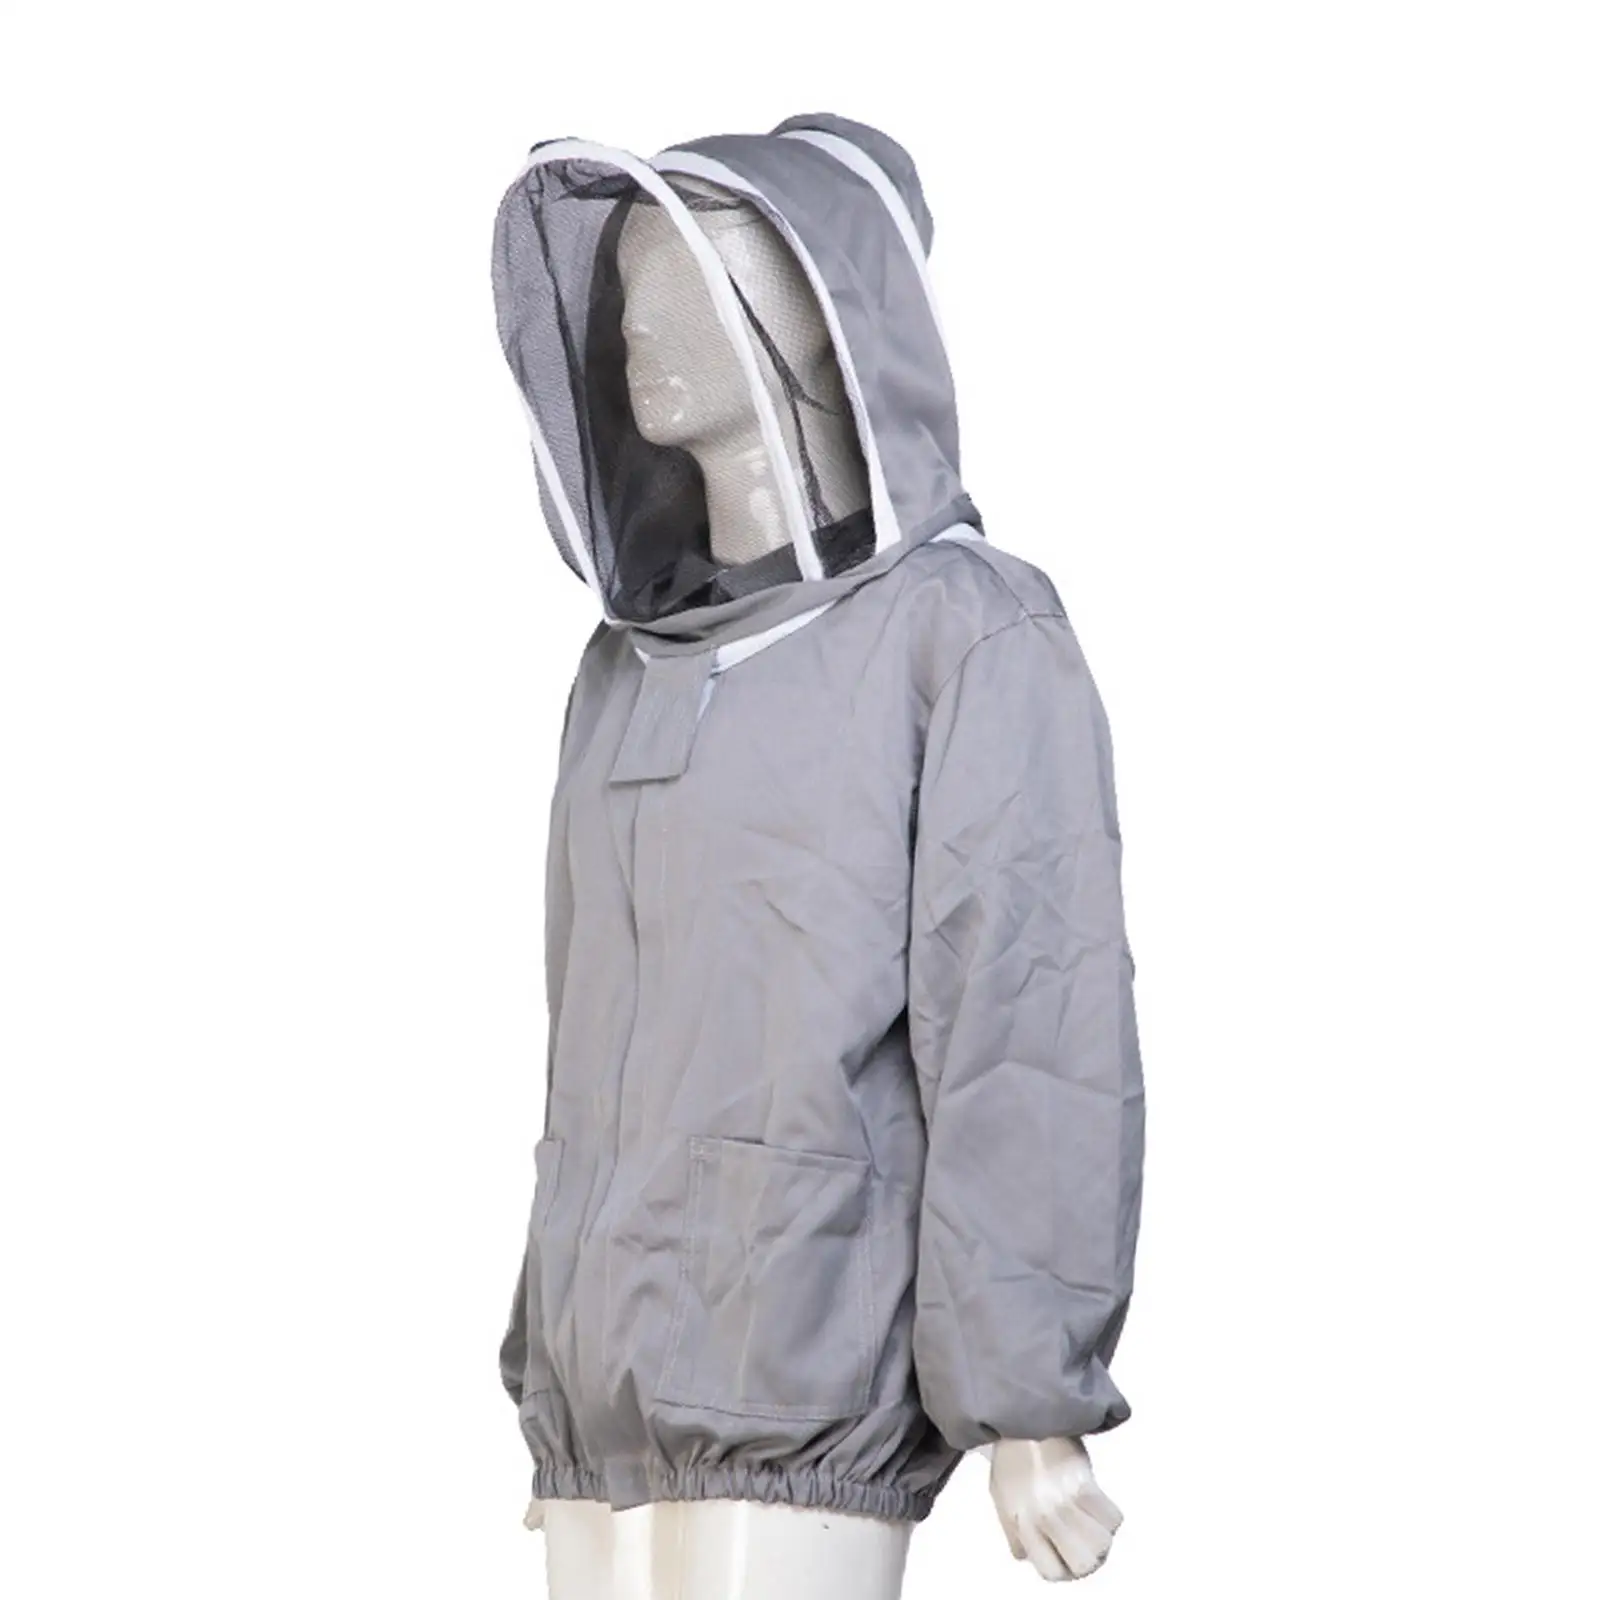 Beekeeping Protective Jacket Suit with Pockets with Hat Equip Suit Breathable with Fencing Veil Beekeeper Suit for Beginners